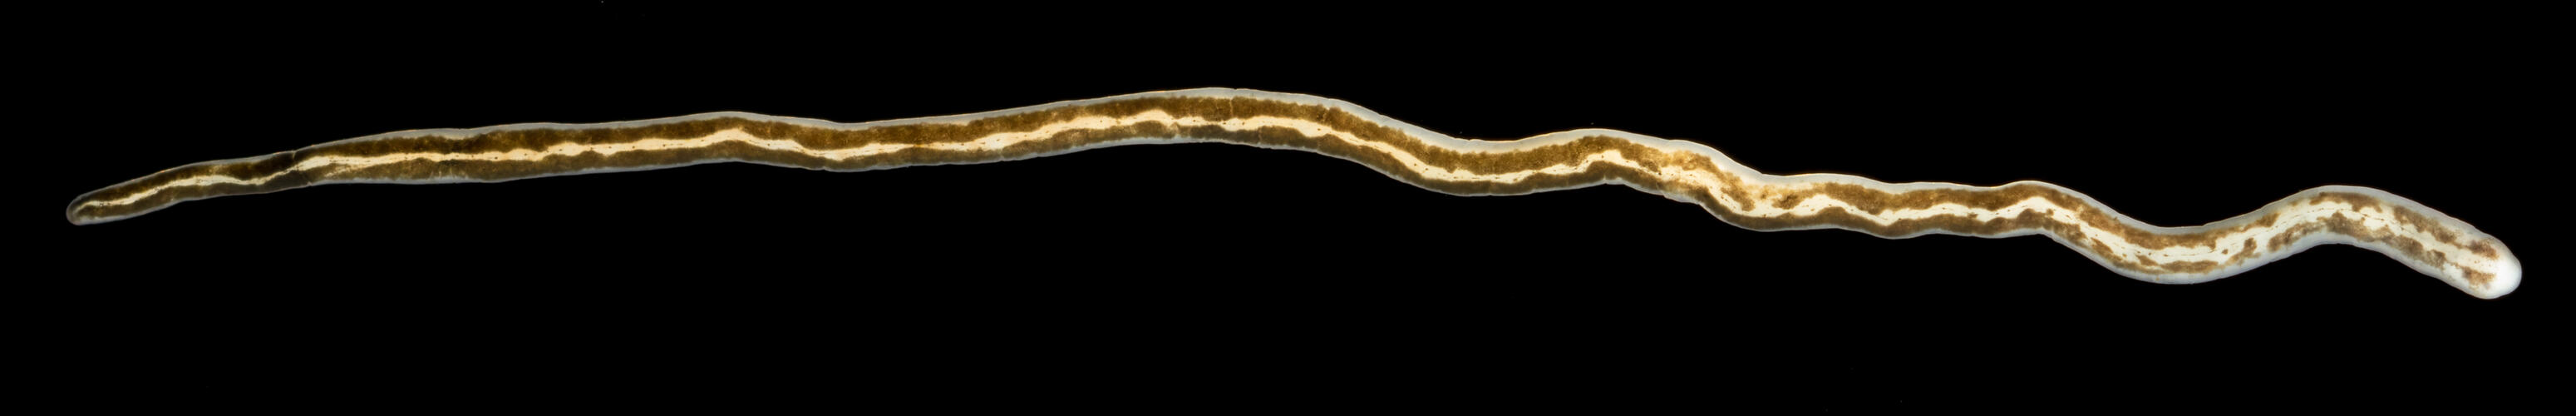 Long narrow worm against black background.